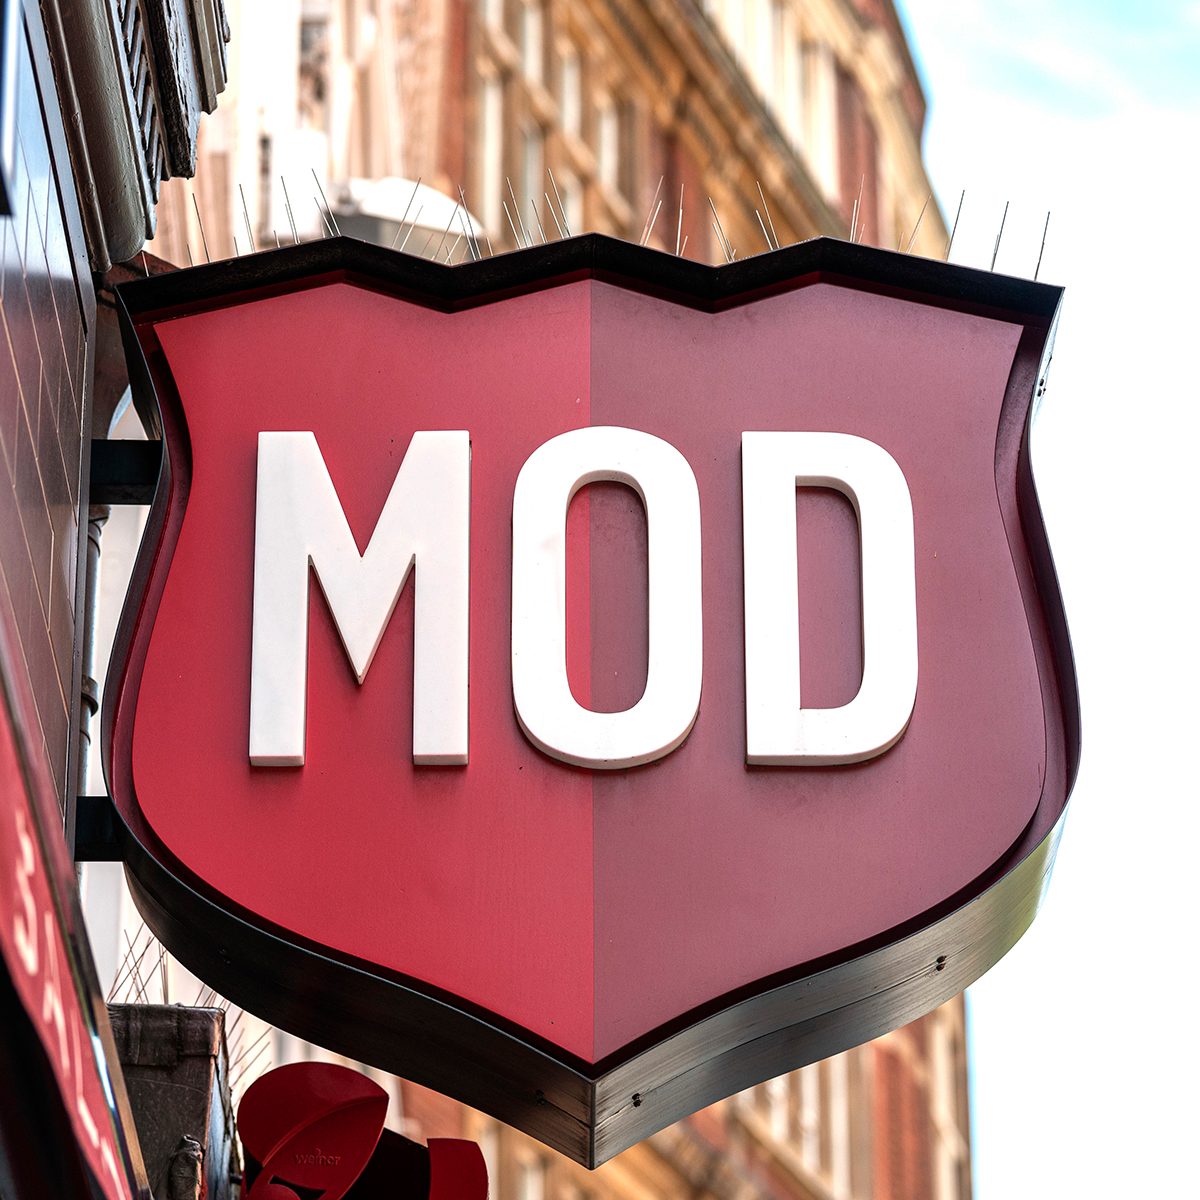 MOD Pizza logo on their restaurant in Leicester Square